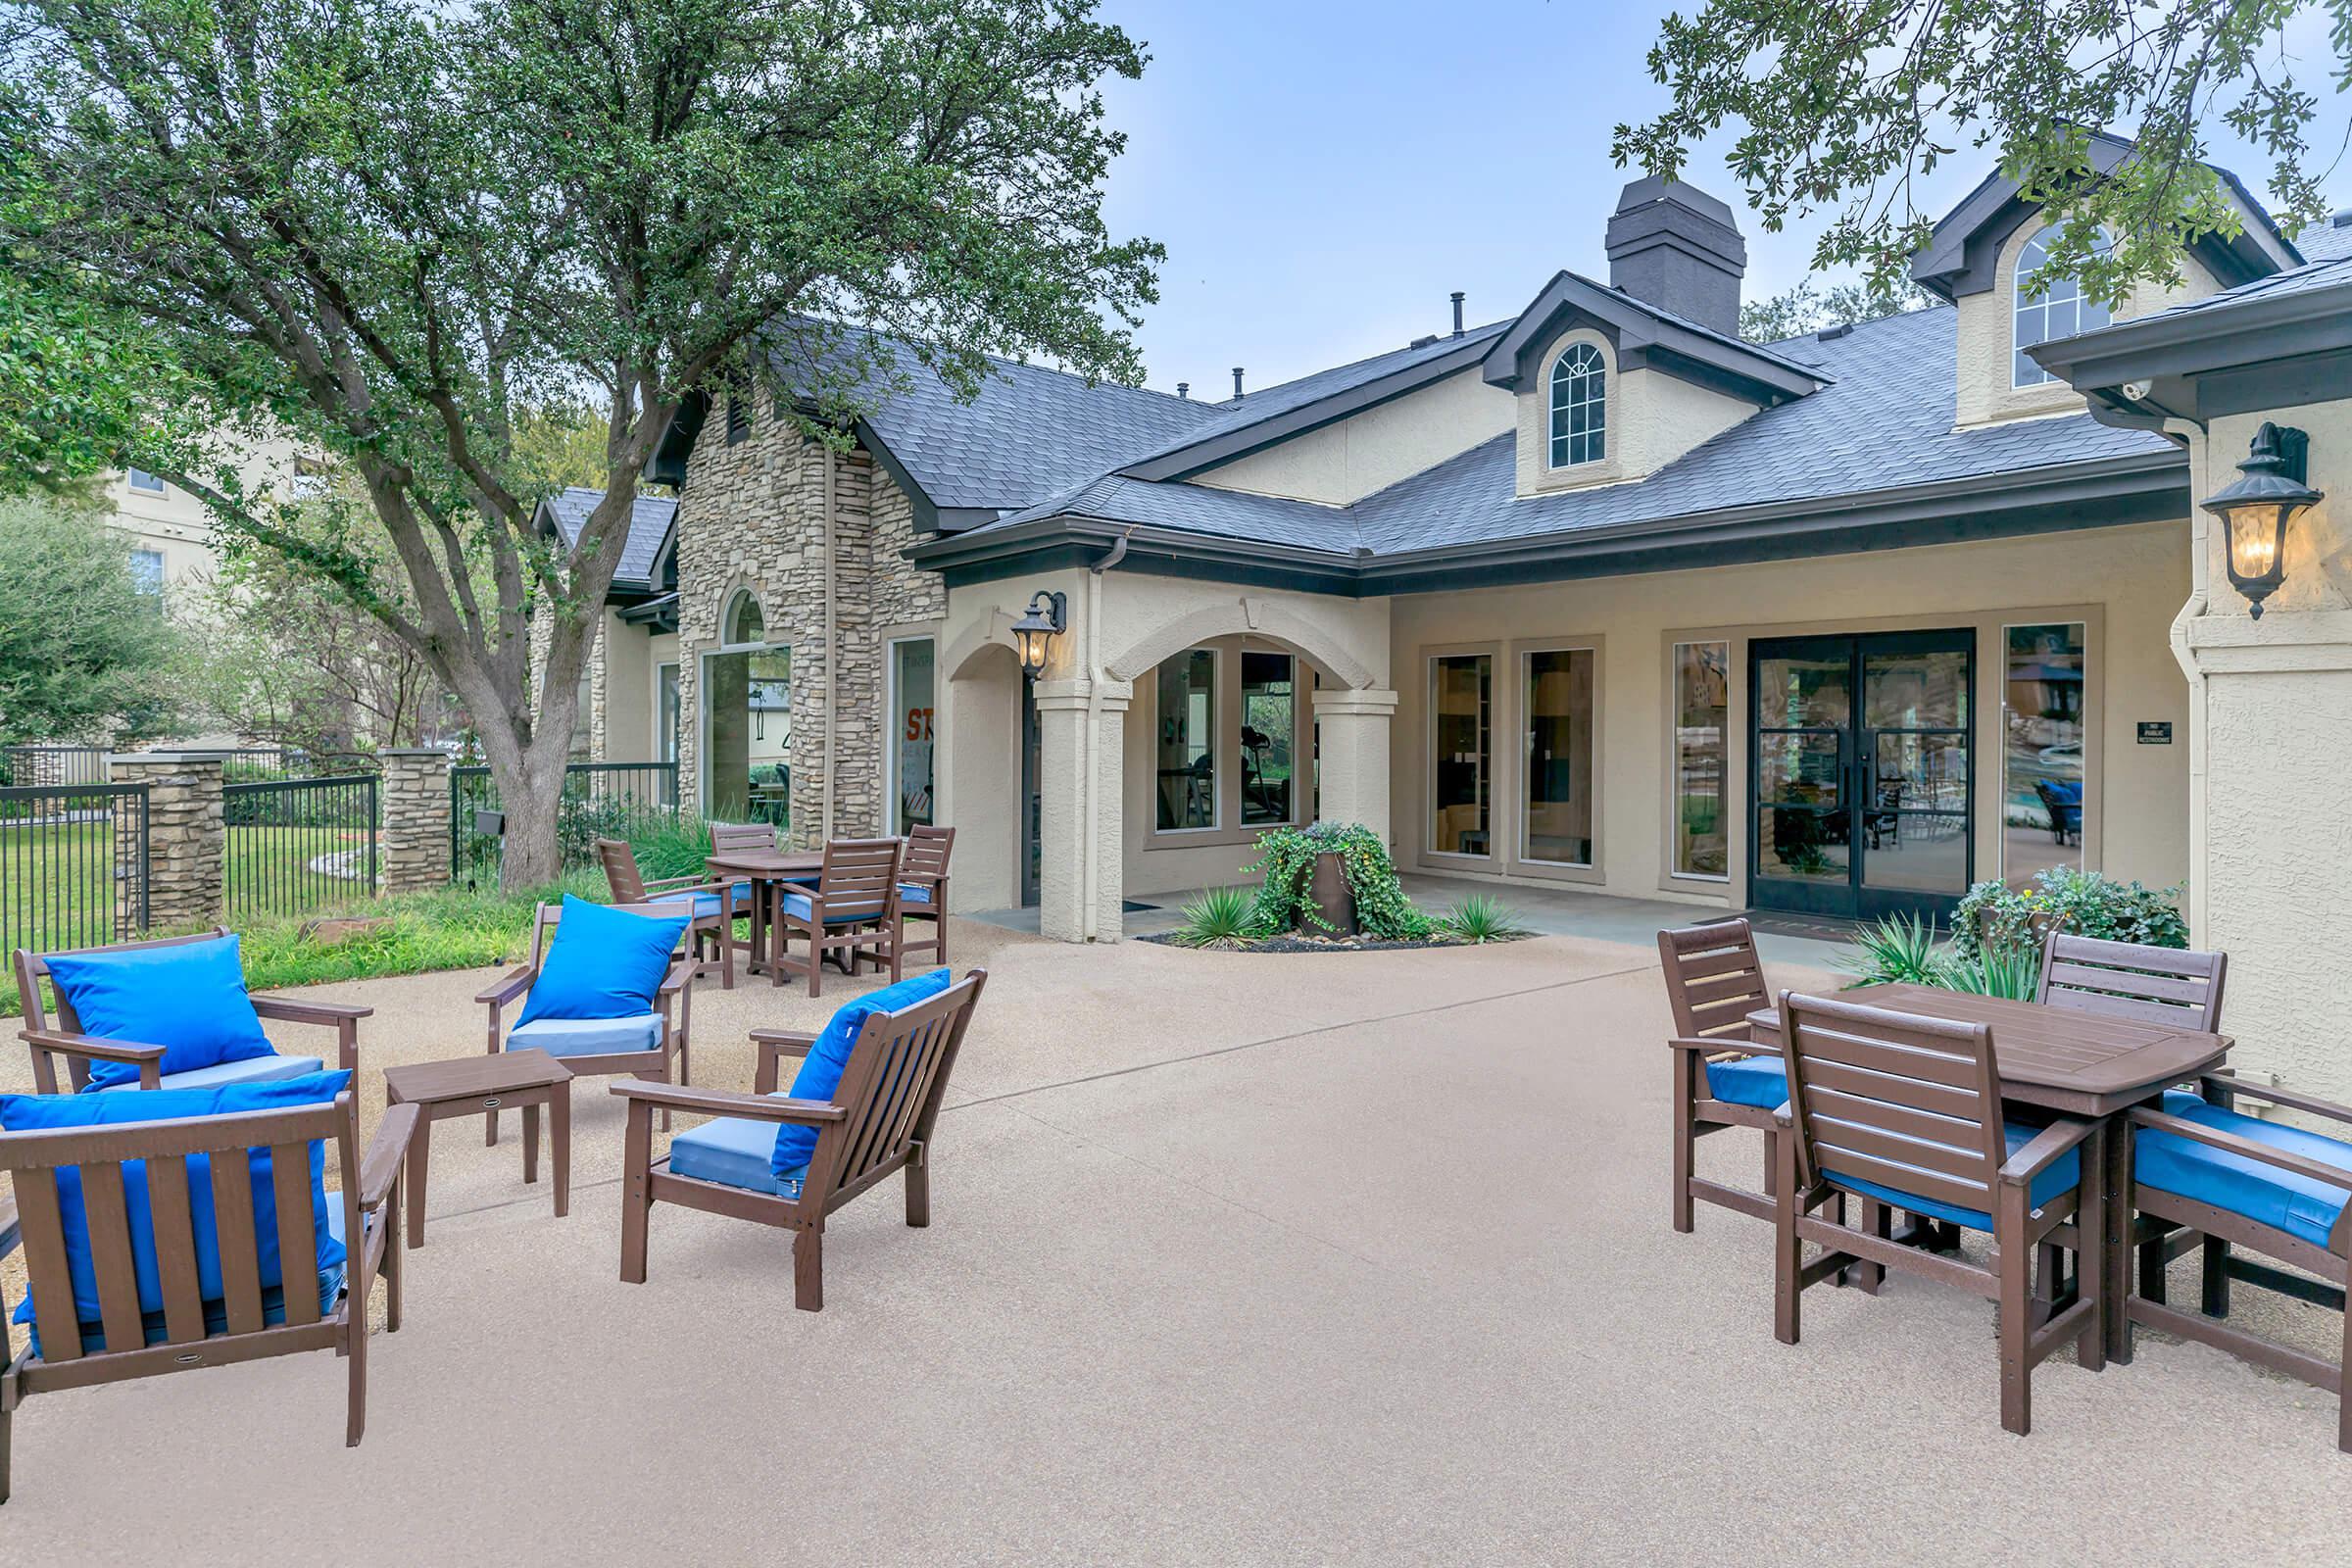 Lake Pointe community patio with blue chairs